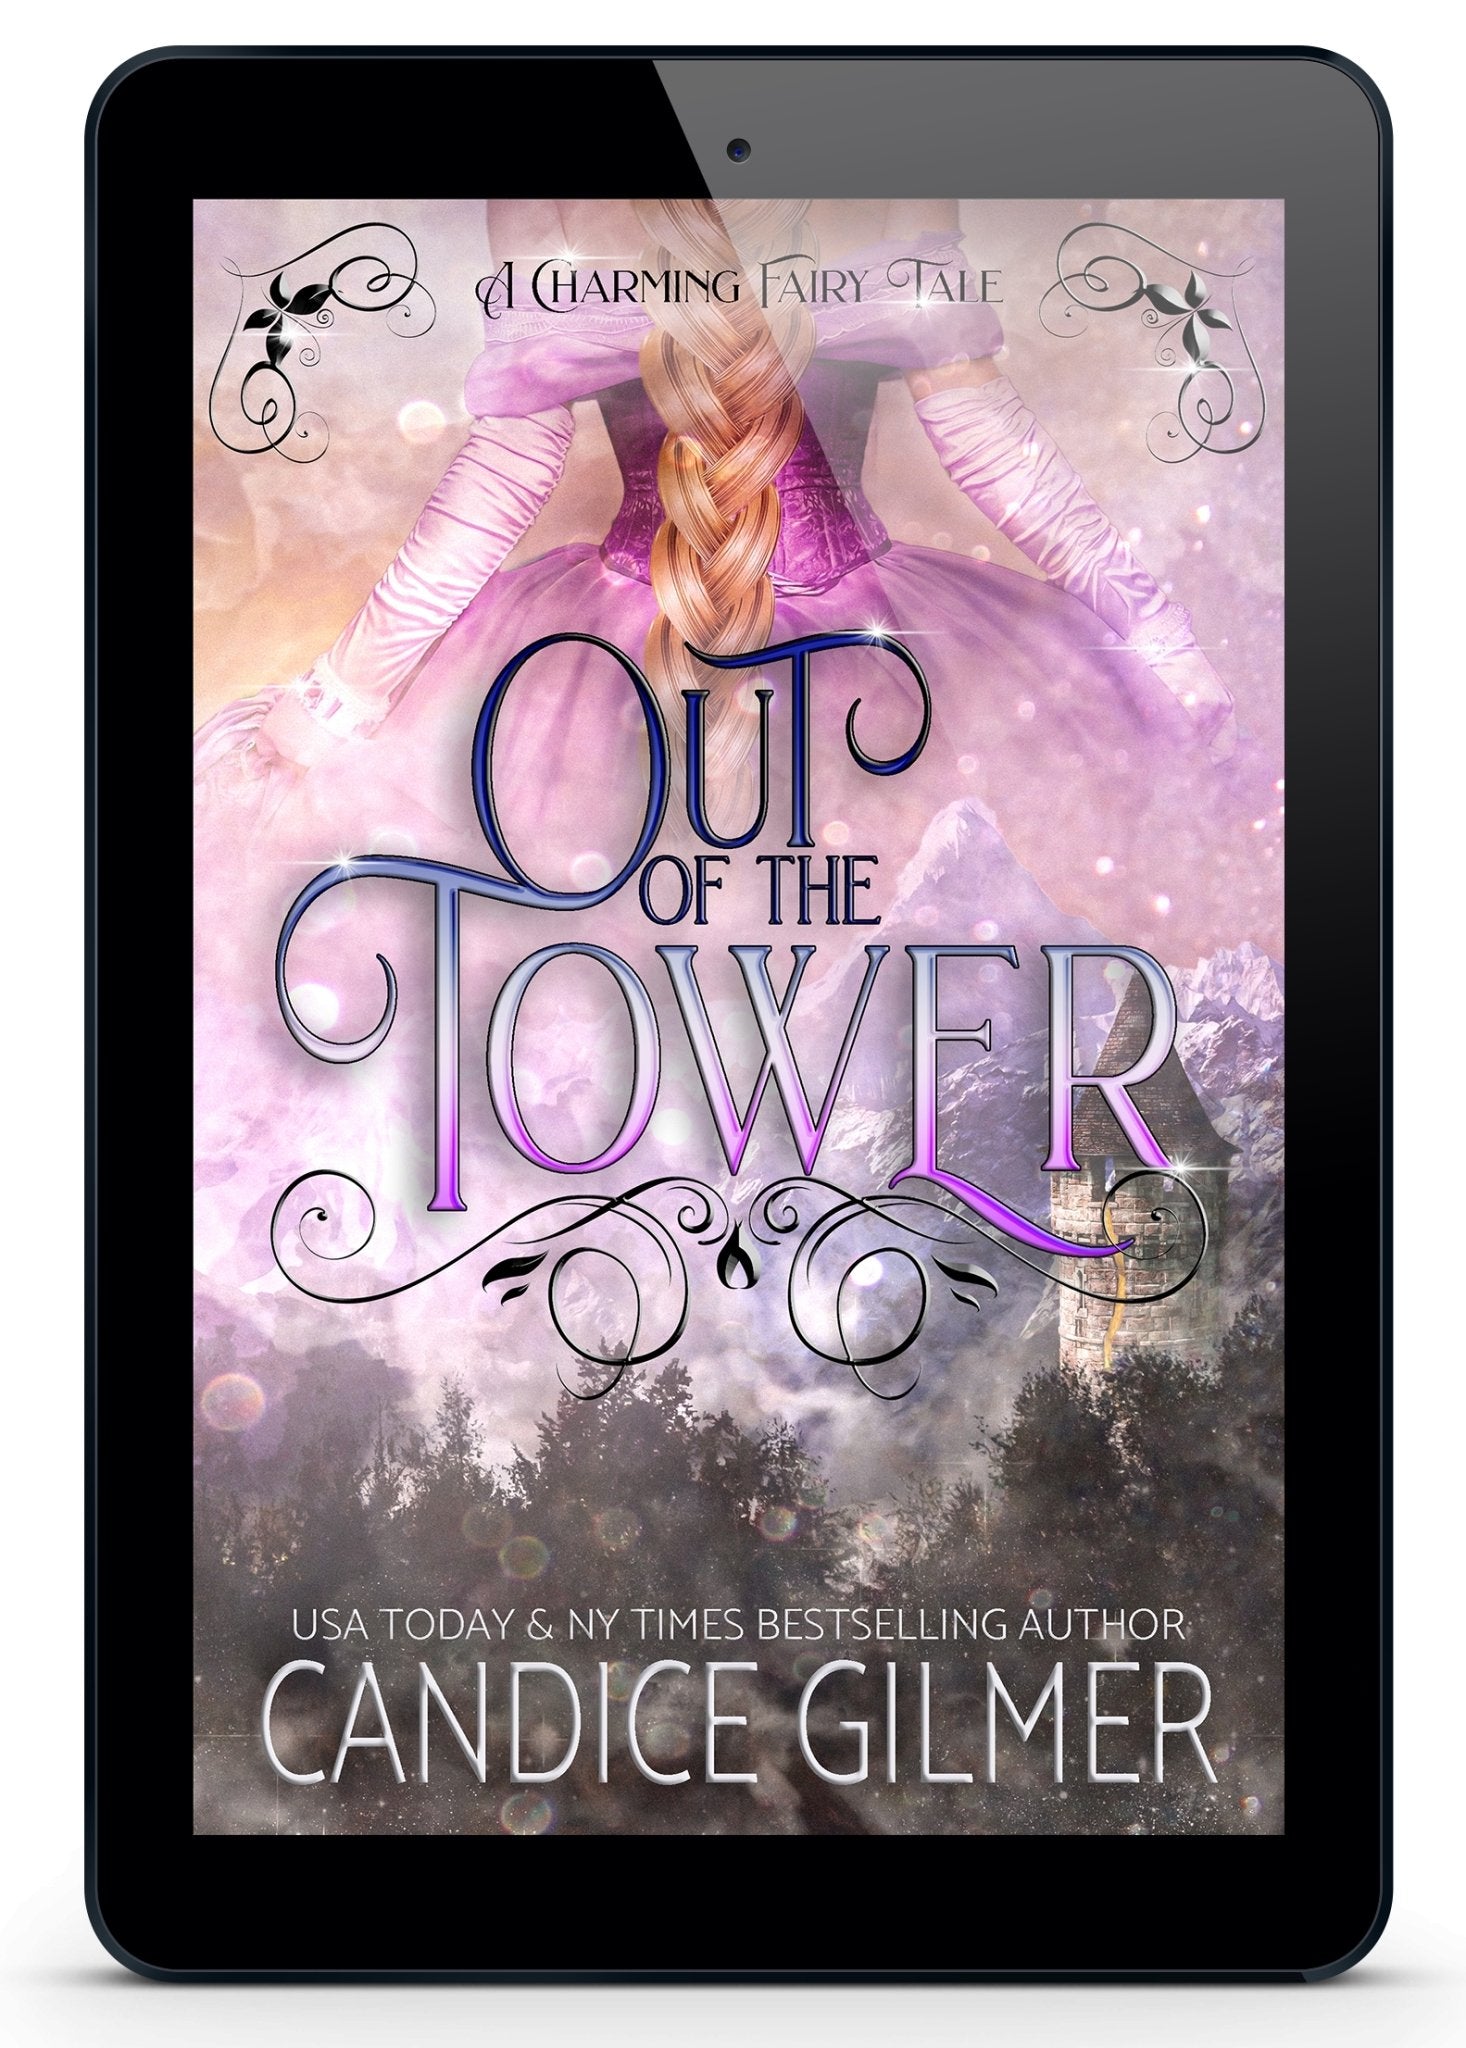 Charming Fairy Tales: Out of the Tower – Candice Gilmer Books